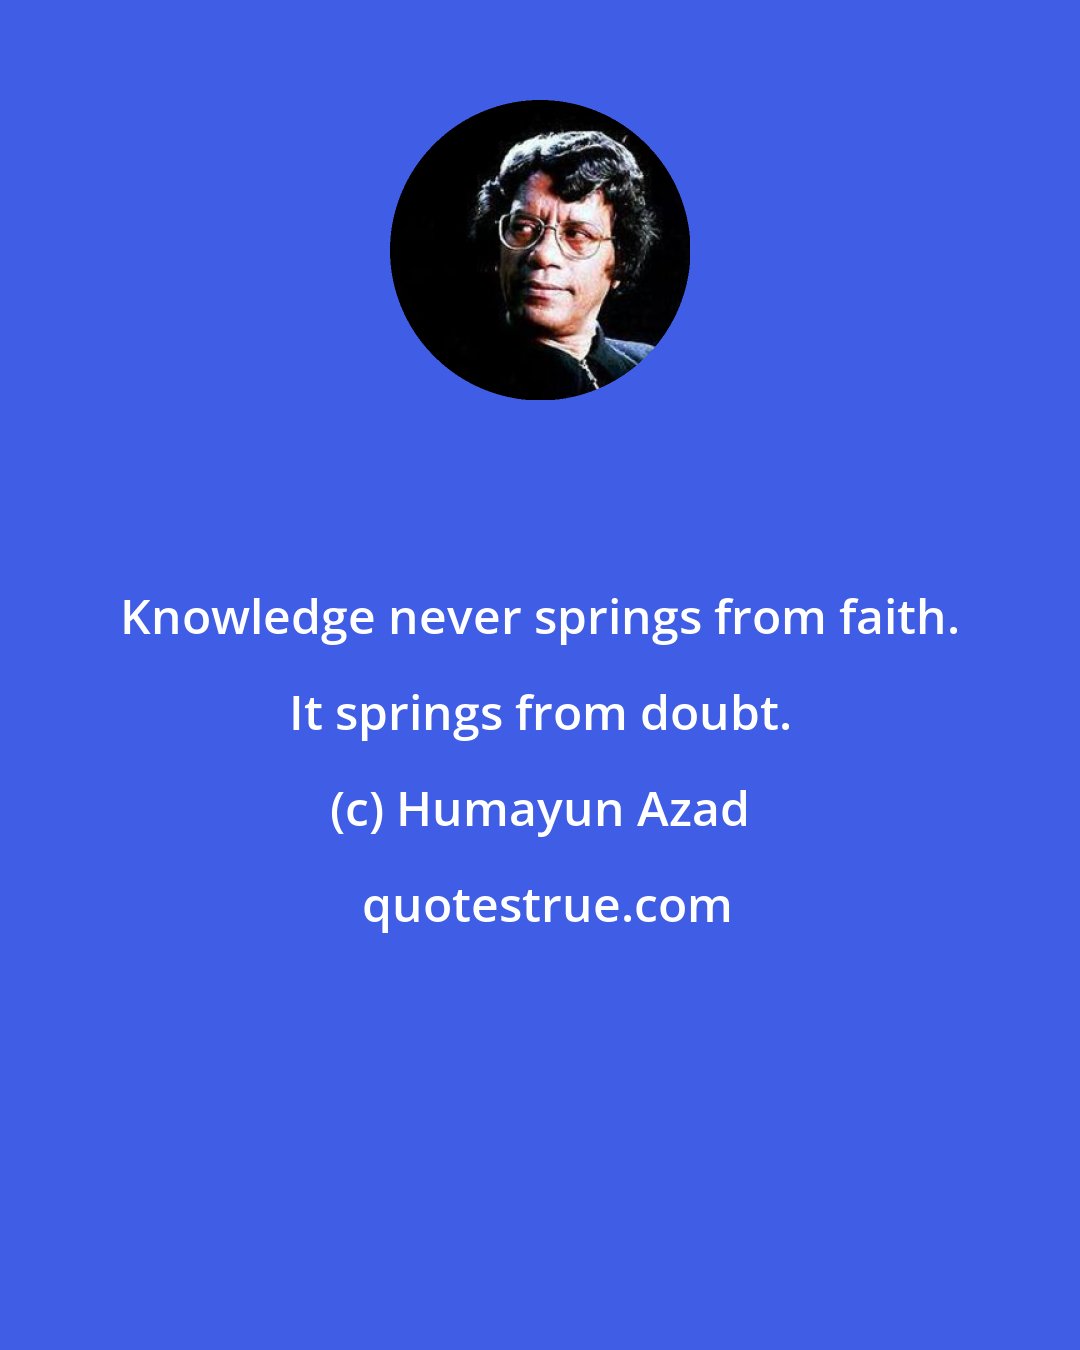 Humayun Azad: Knowledge never springs from faith. It springs from doubt.